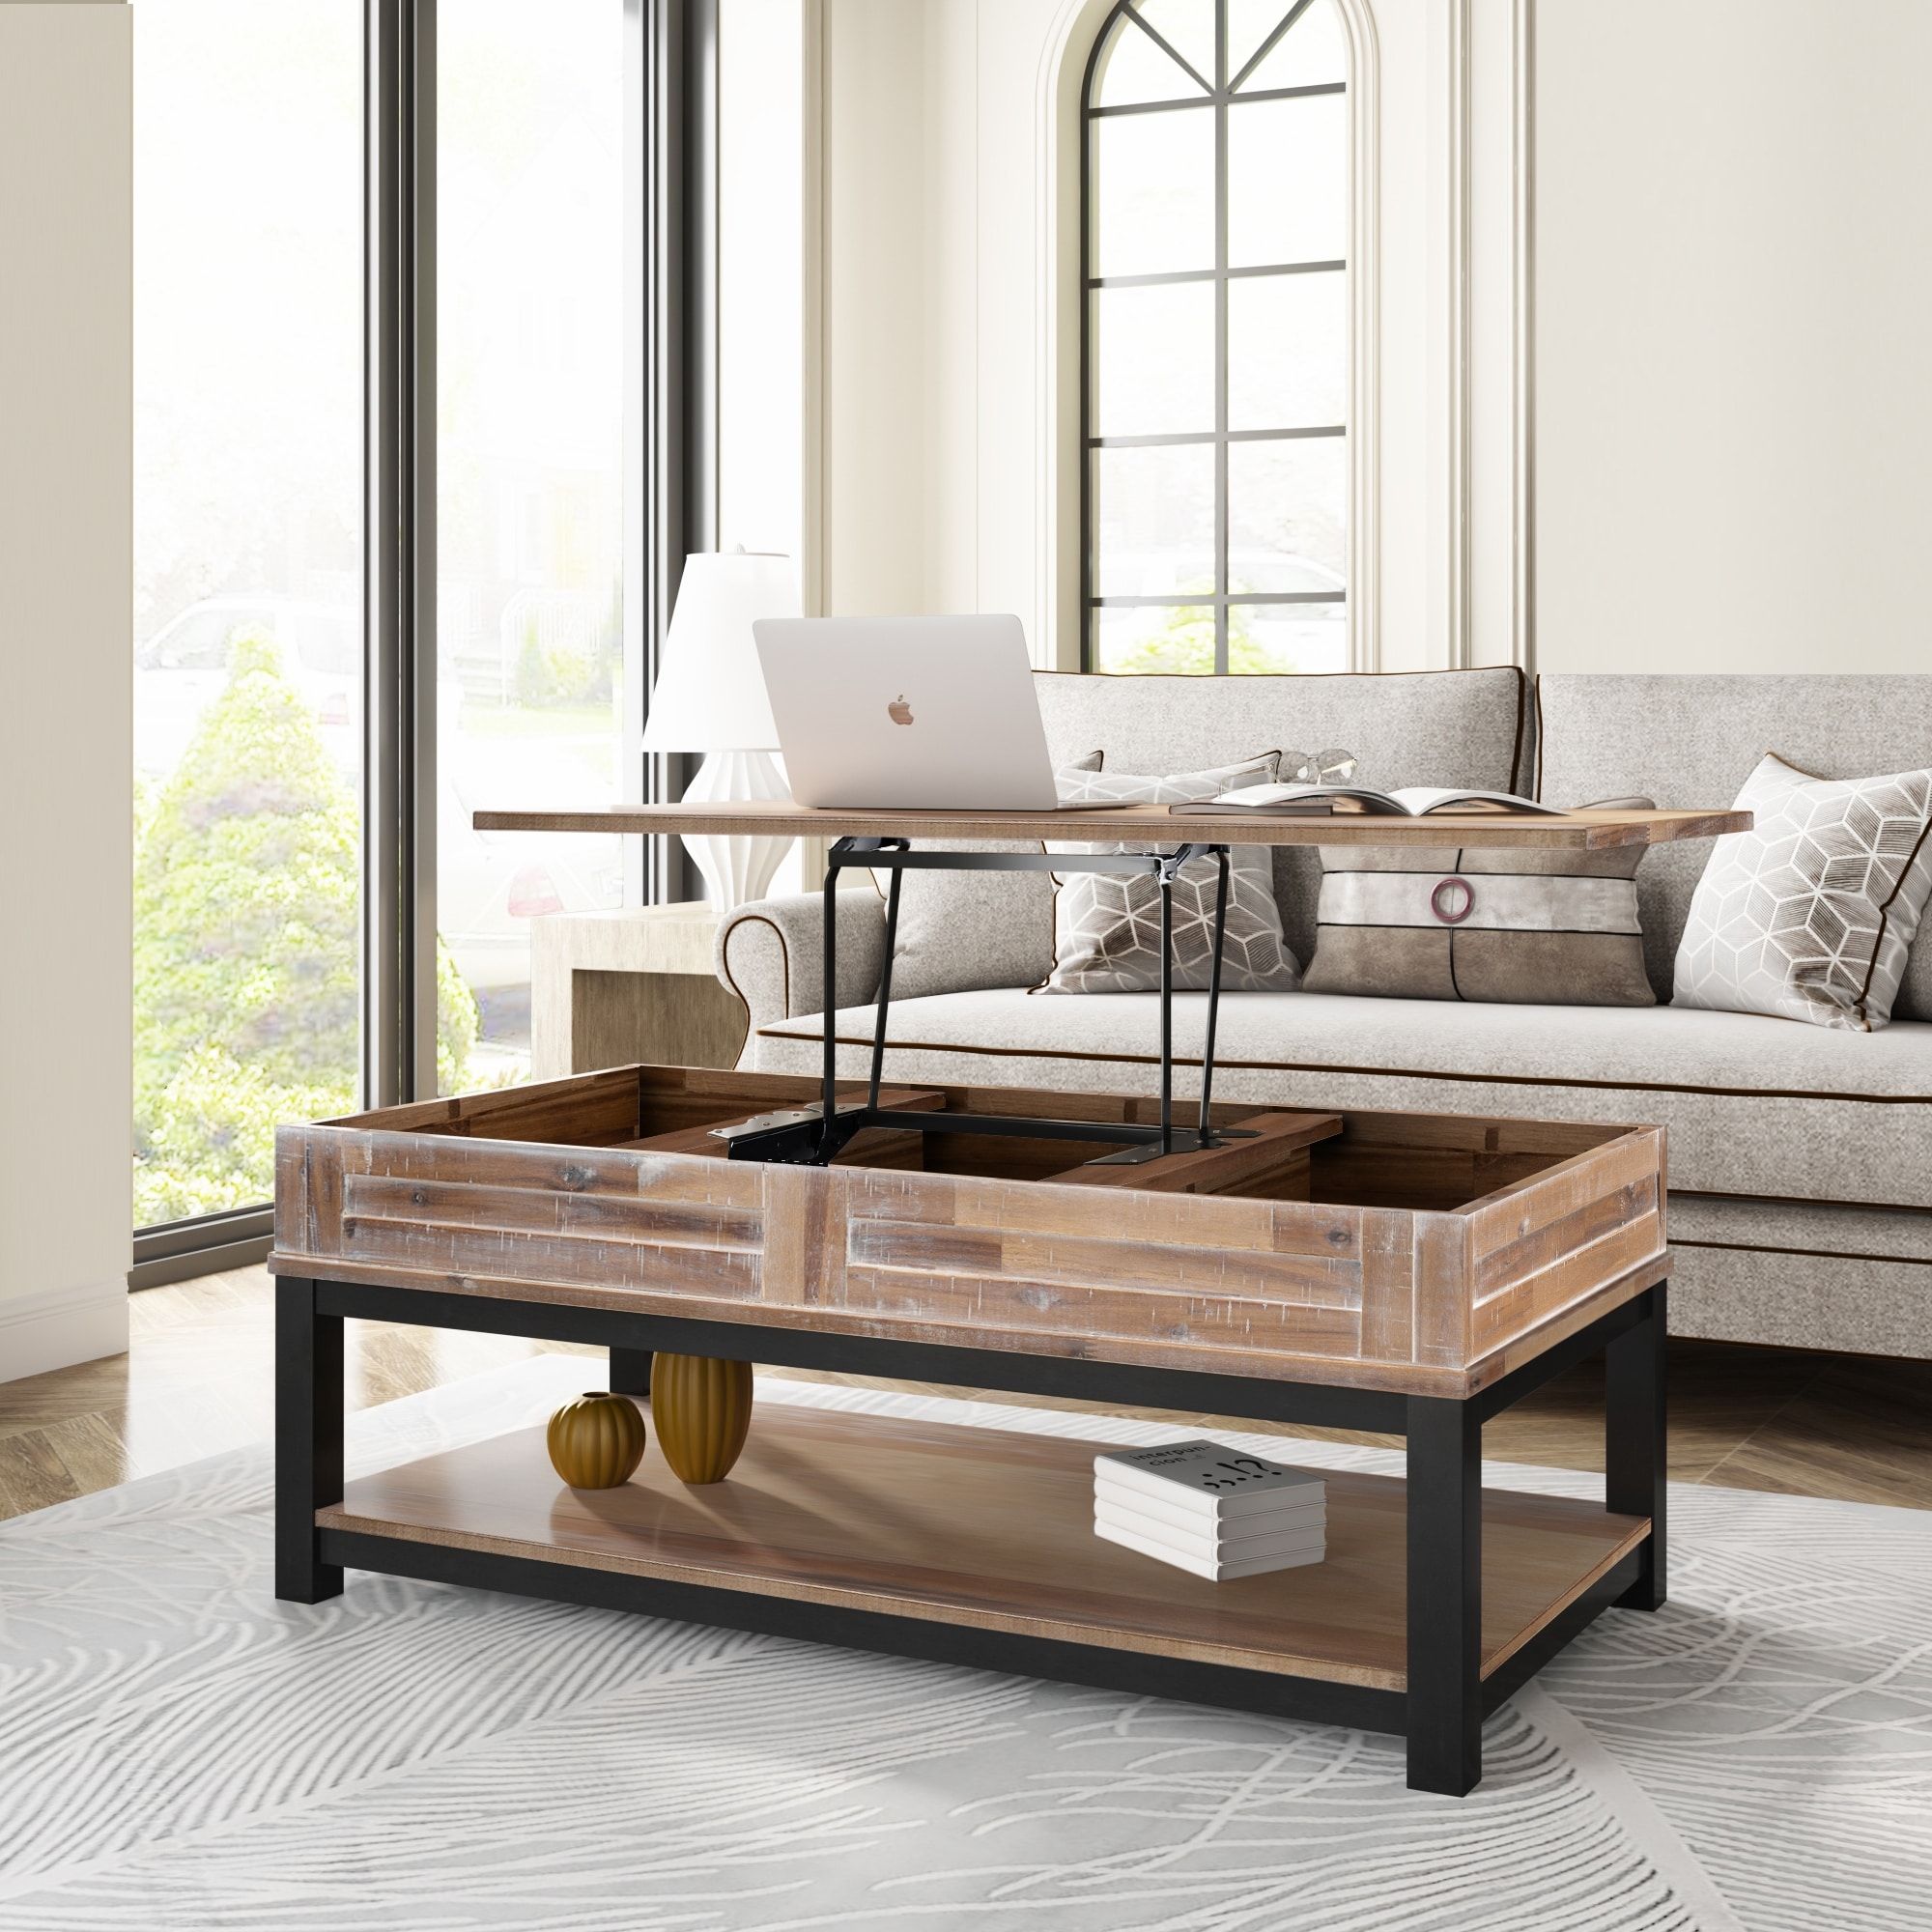 Wooden Lift Top Coffee Table With Inner Storage Space And Shelf – Bed Bath  & Beyond – 36909922 Throughout Wood Lift Top Coffee Tables (View 13 of 15)